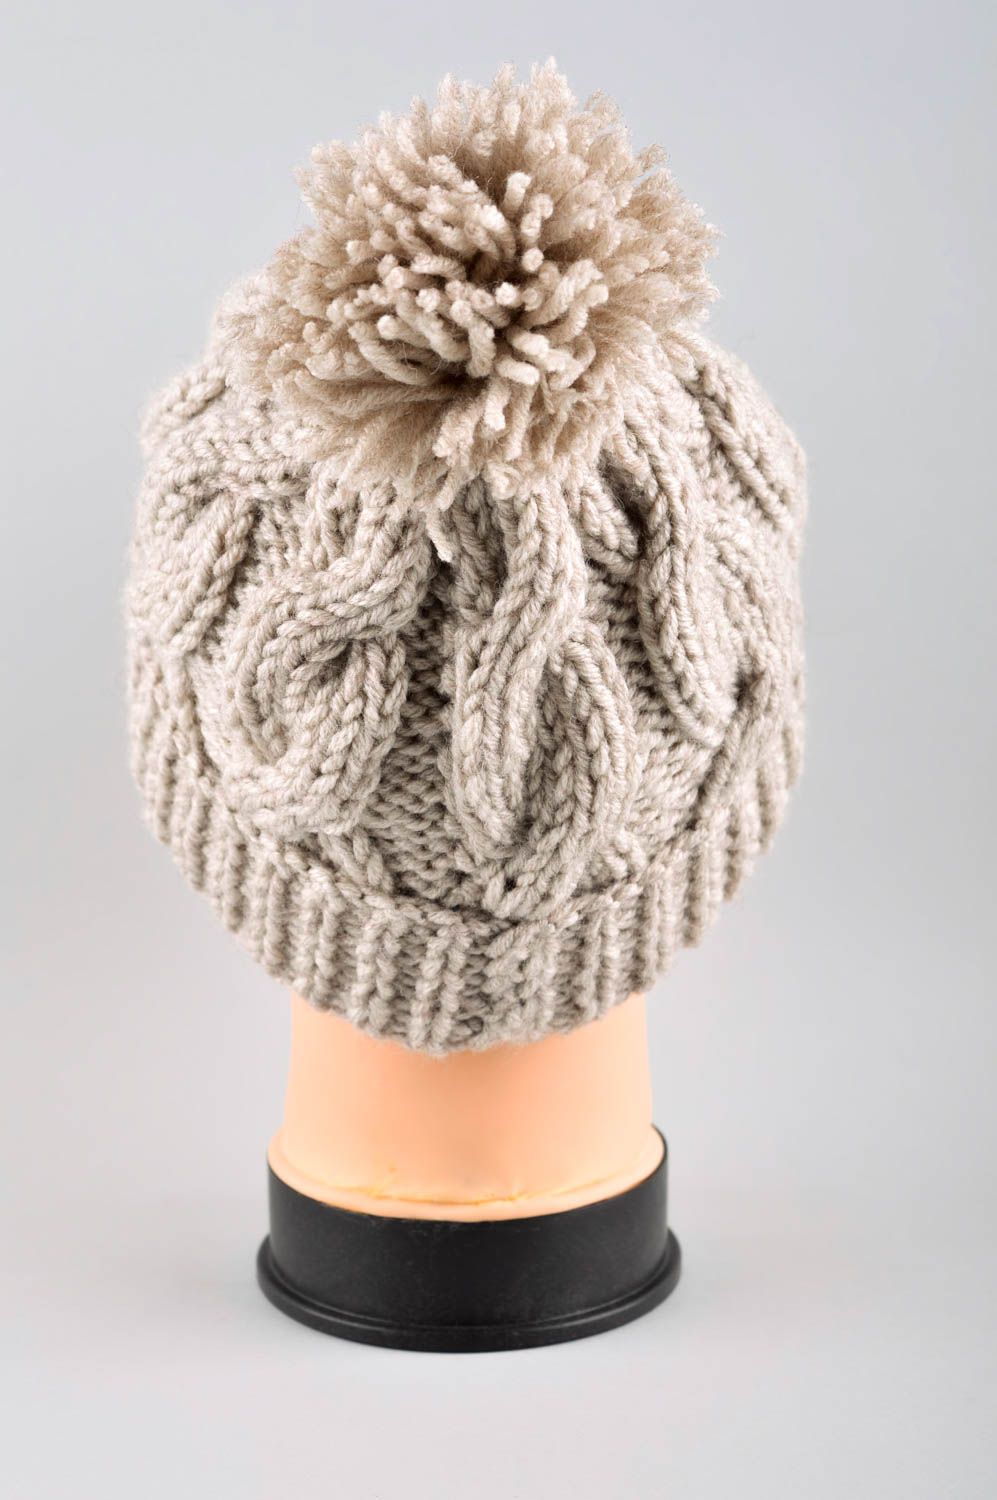 Handmade cute winter cap knitted warm accessories stylish hat for women photo 4